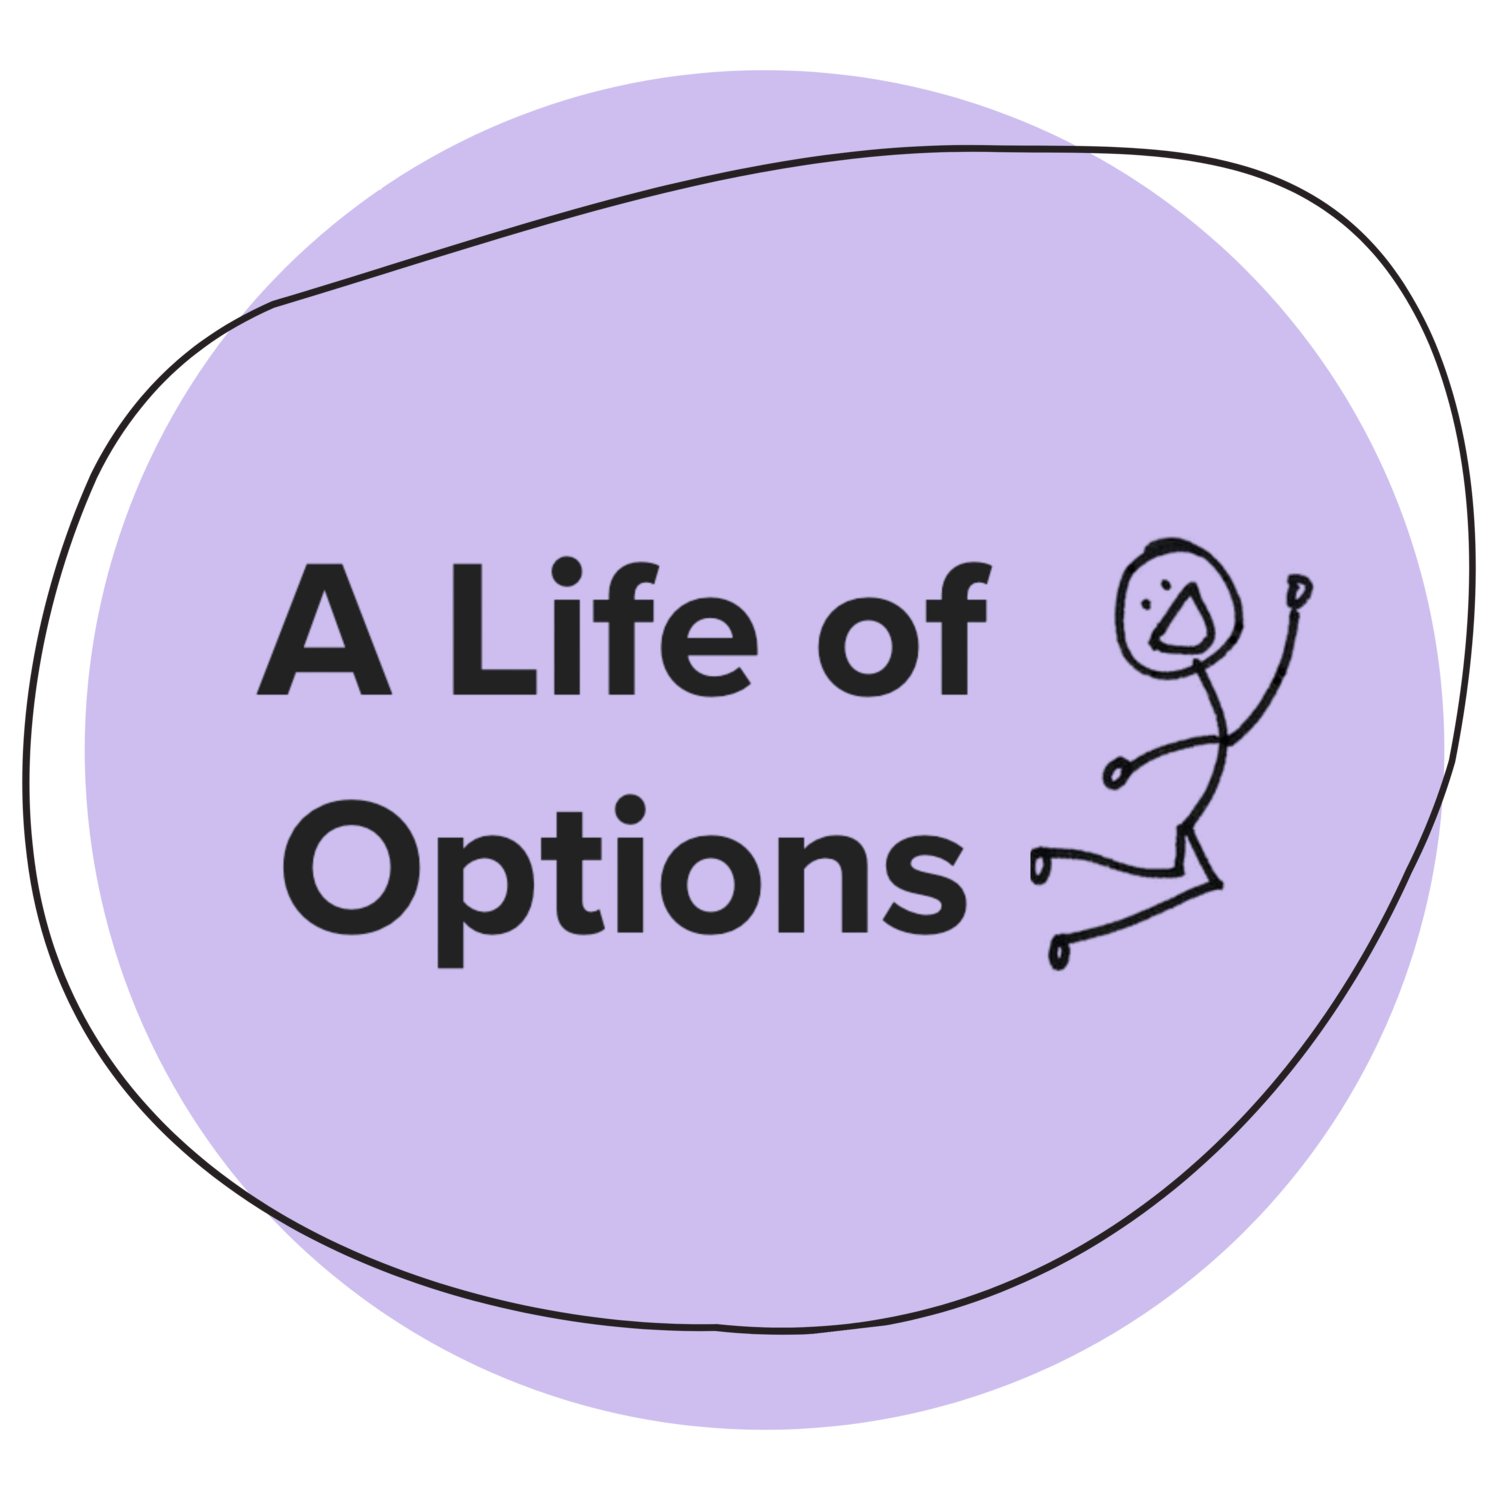 A Life of Options